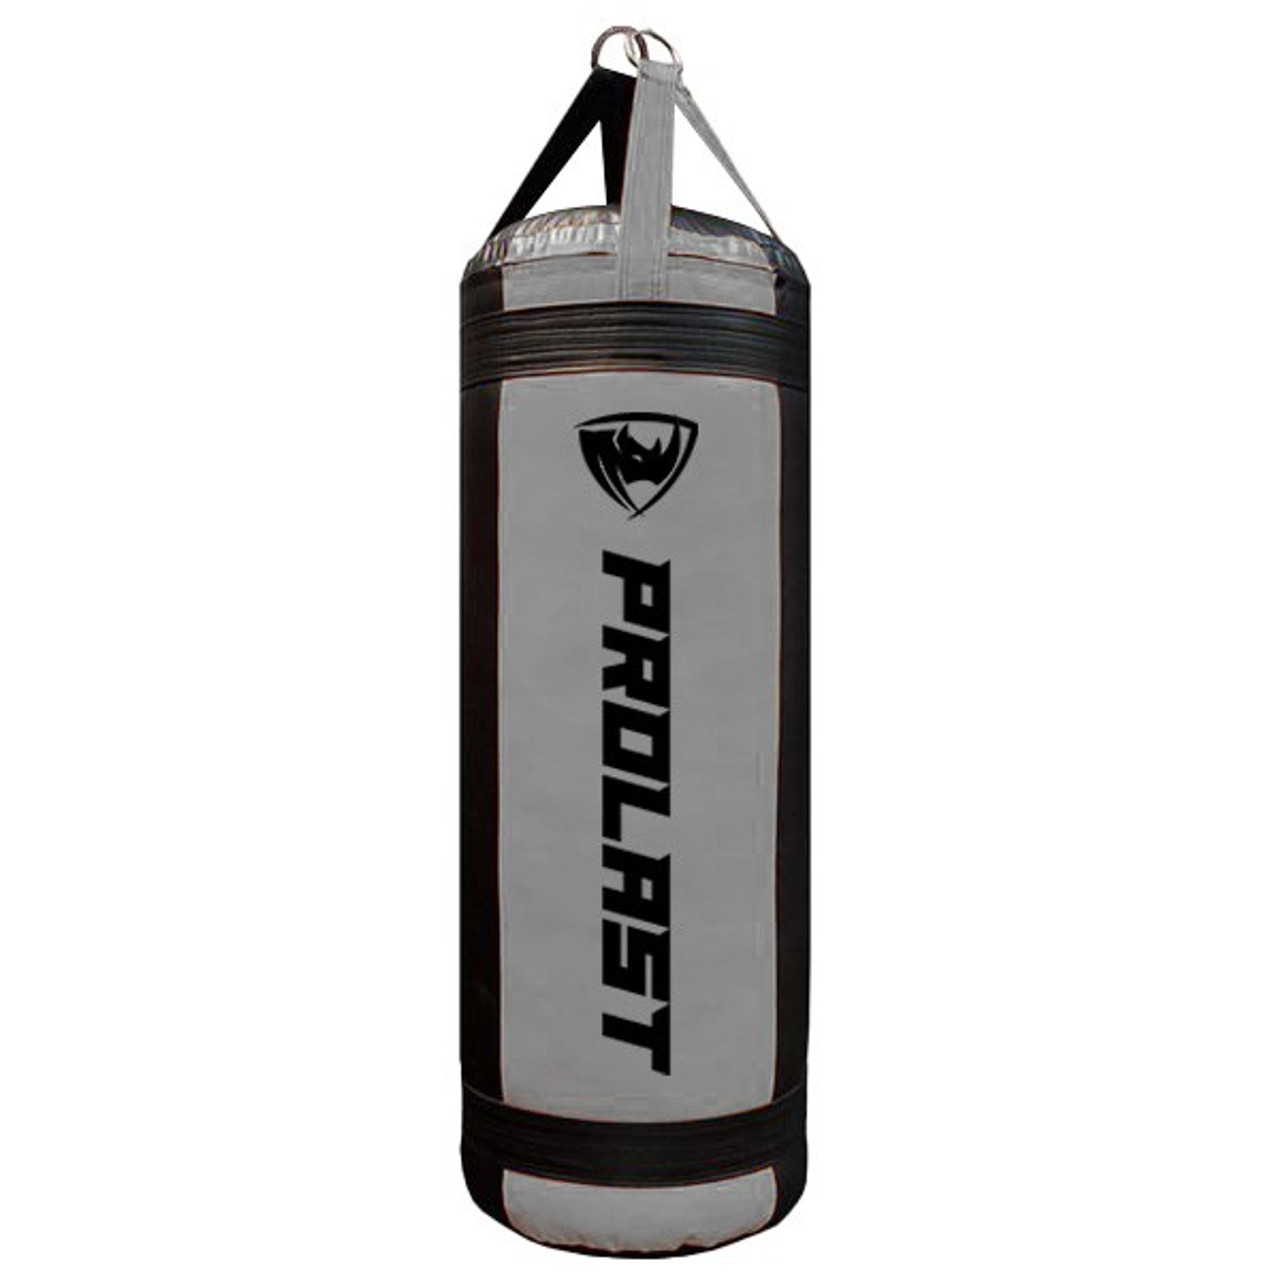 Prolast 4FT XL 135LB Mayweather Style Punching Bag Black // Gray UNFILLED - Made in USA